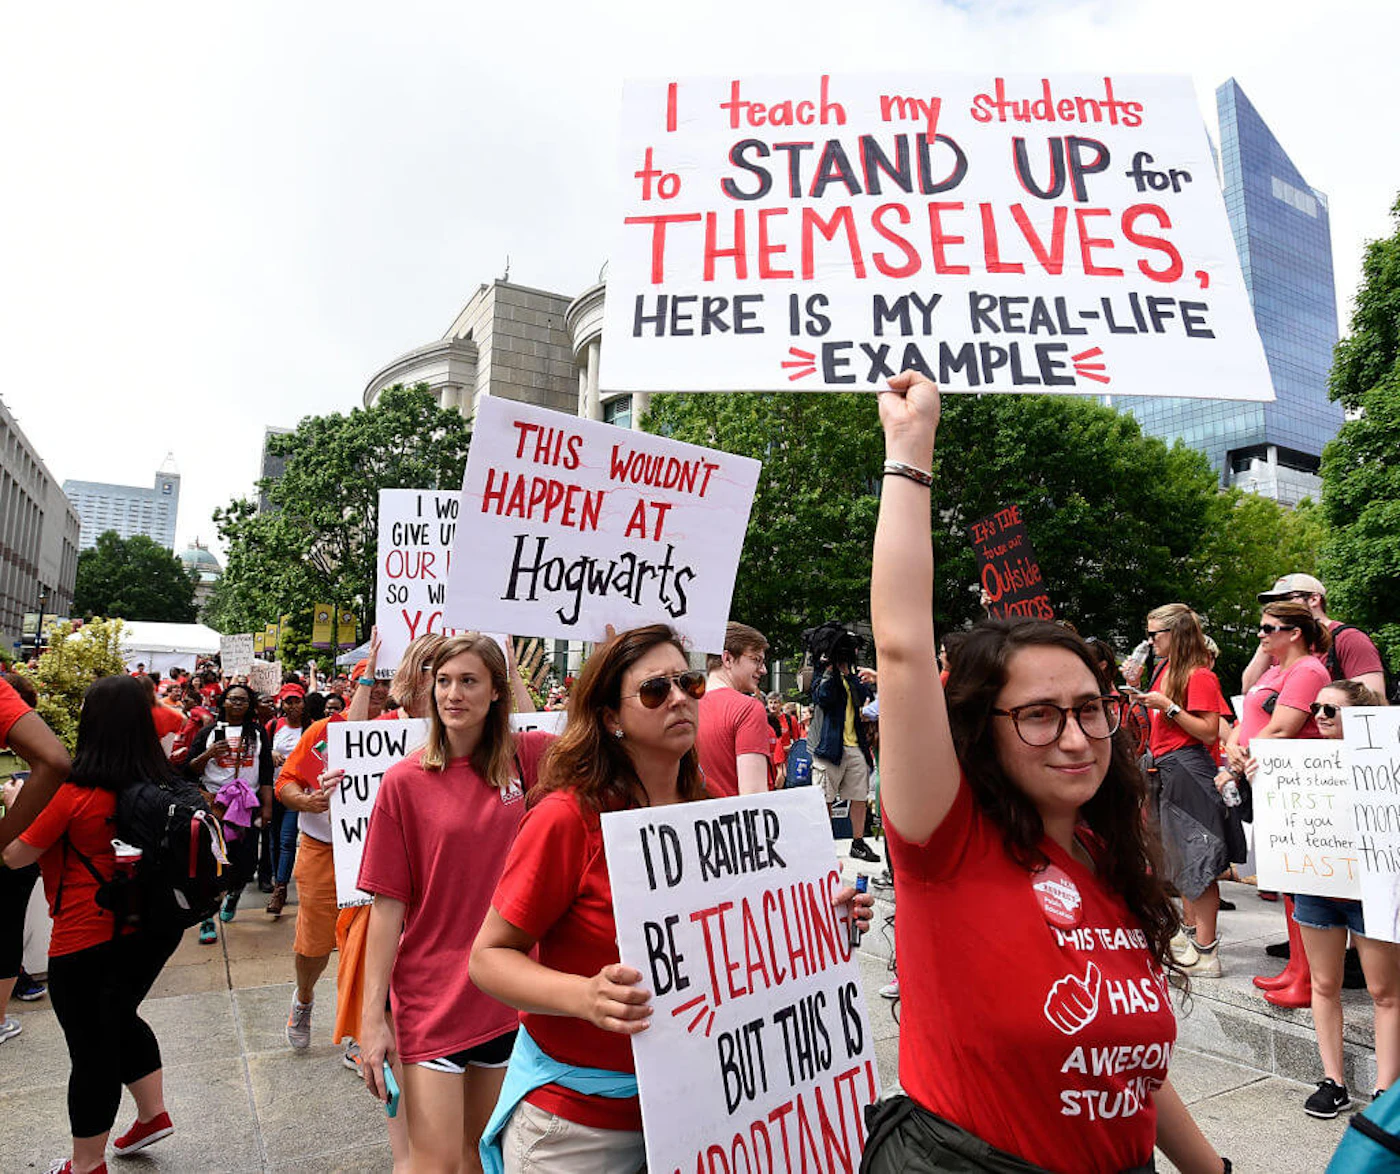 Crowds fill Bicentennial Plaza outside of the North Carolina Legislative Building during the March for Students and Rally for Respect on May 16, 2018 in Raleigh, North Carolina. (Photo by Sara D. Davis/Getty Images)